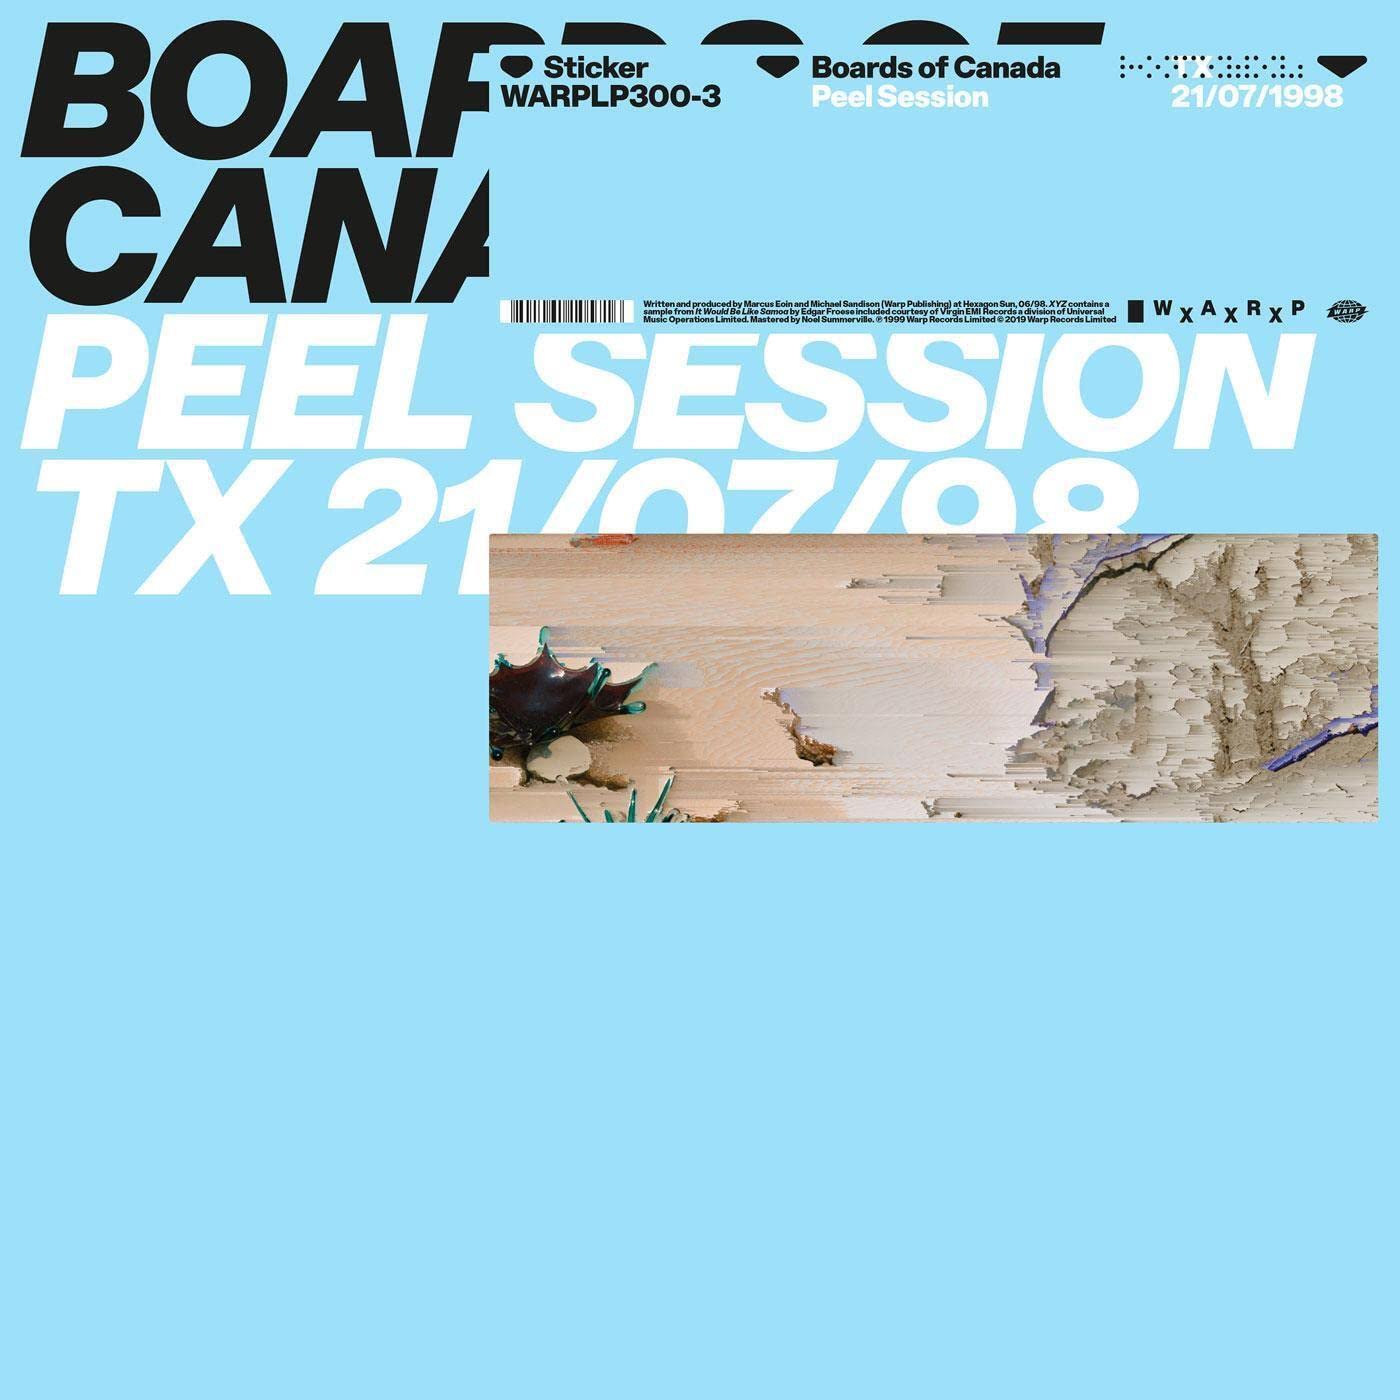 Boards of Canada - Peel Sessions